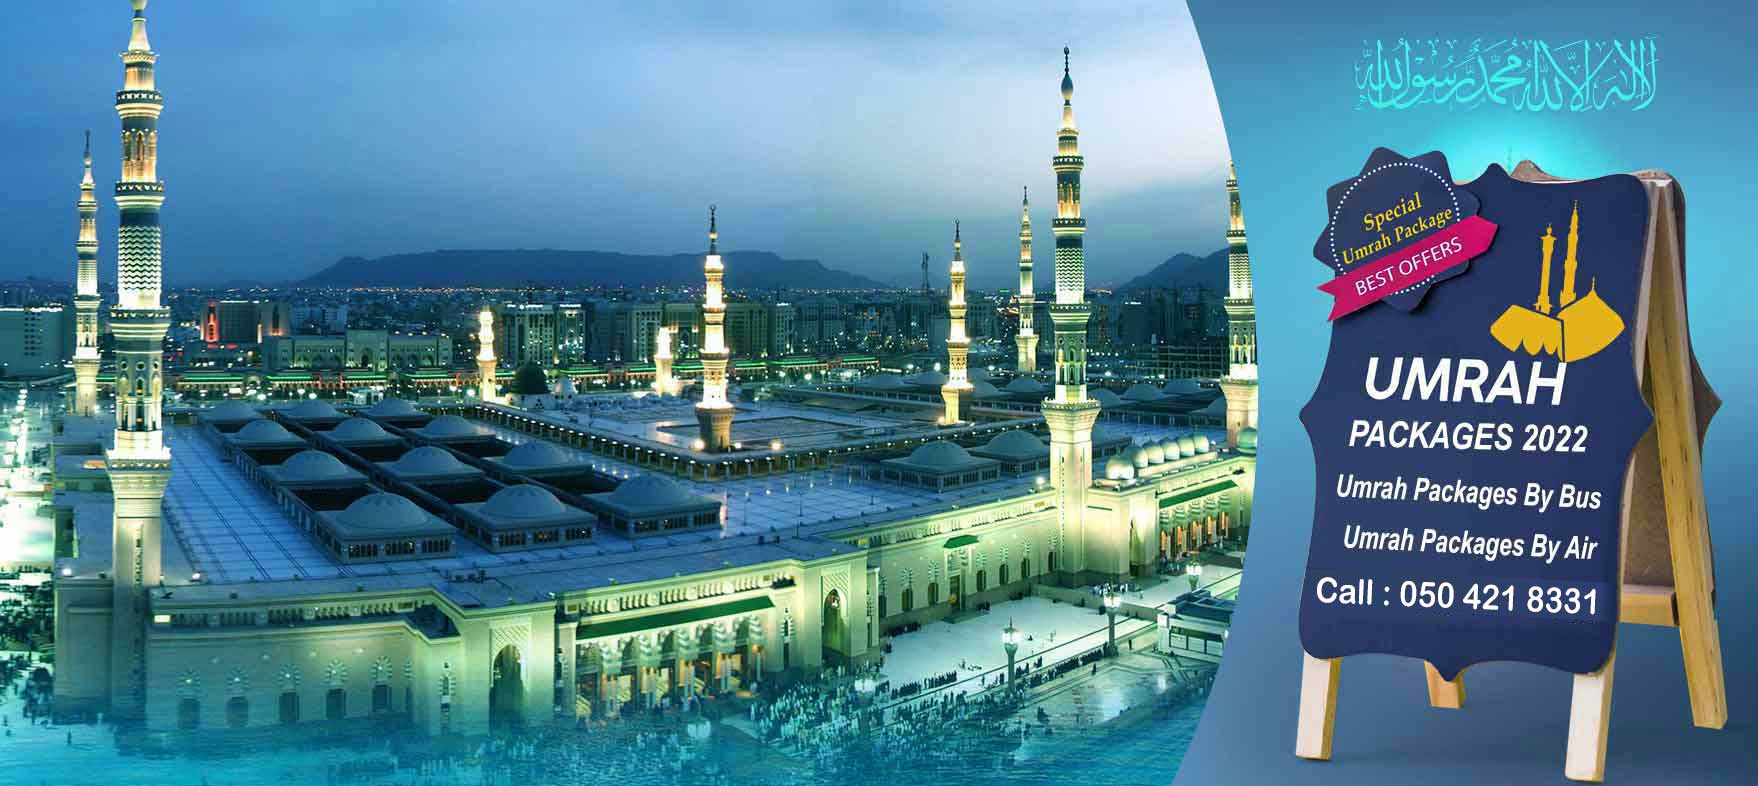 umrah-packages-from-dubai-and-shajrah-Umrah-package-by-bus-and-by-air-saidi-visa